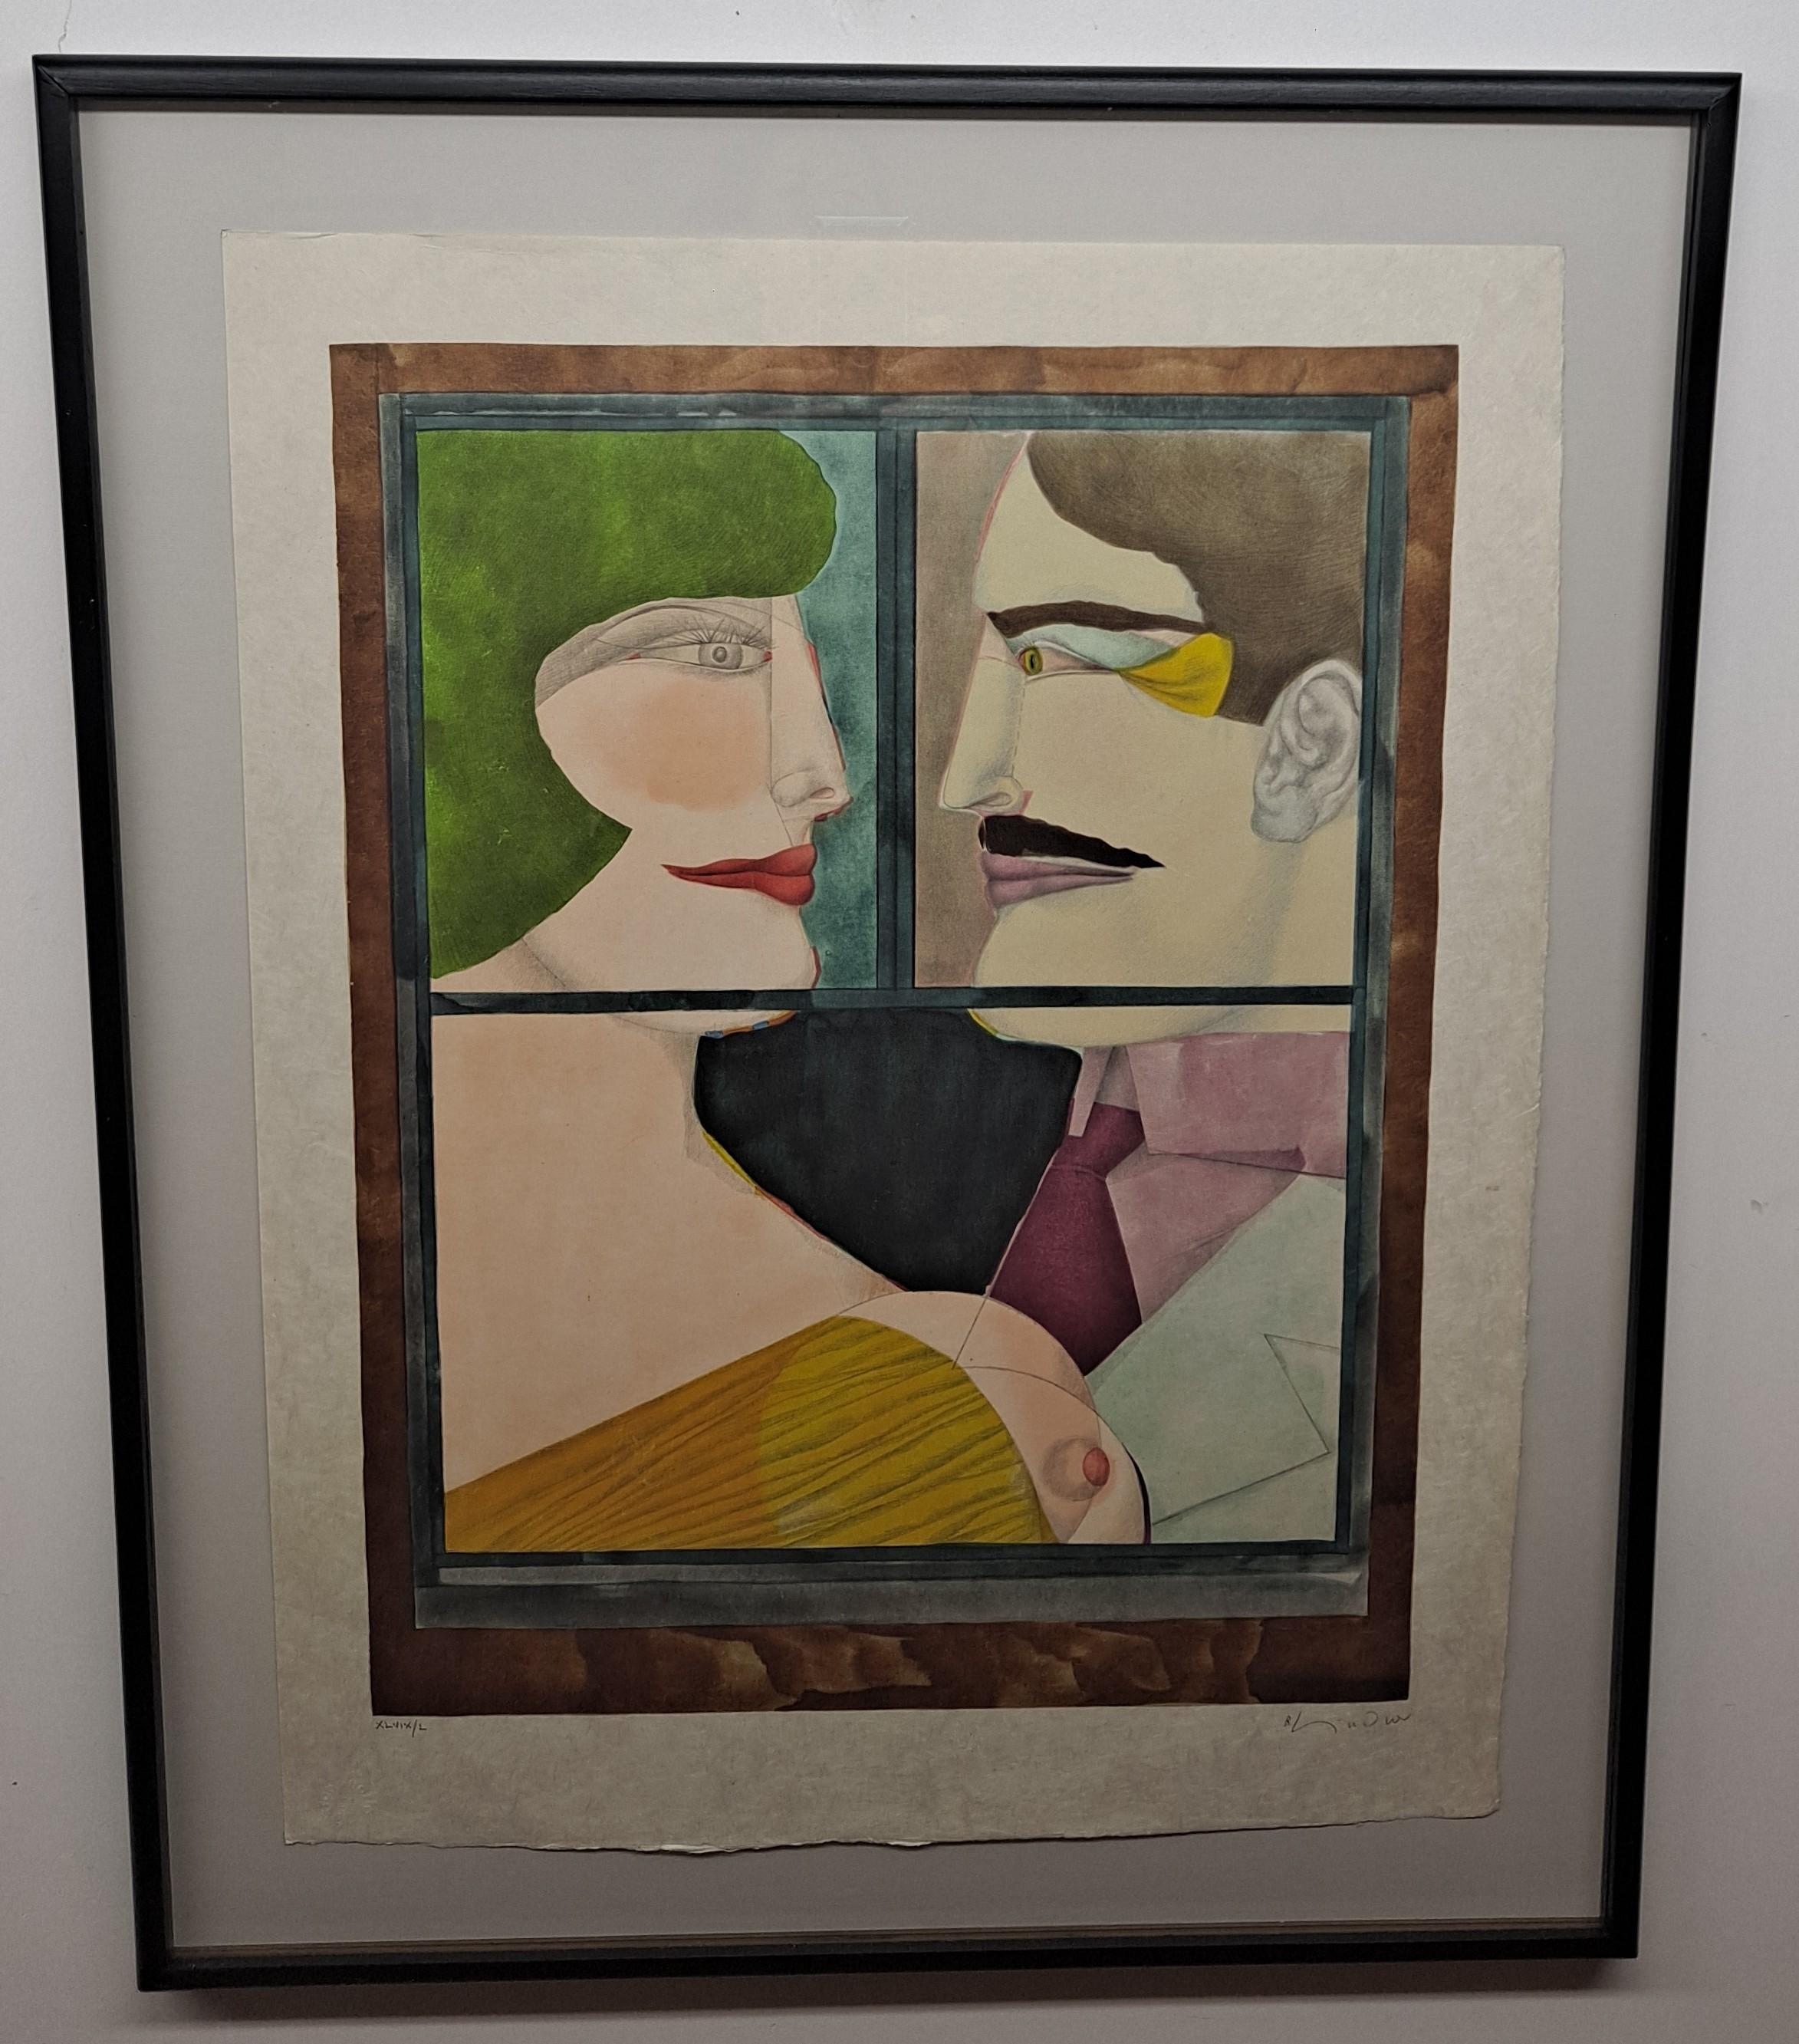 Richard Lindner (German American) 1901 - 1978 Lithograph Signed and Numbered 46/50


19.75 x 25.5 unframed

24.5 x 30 framed
